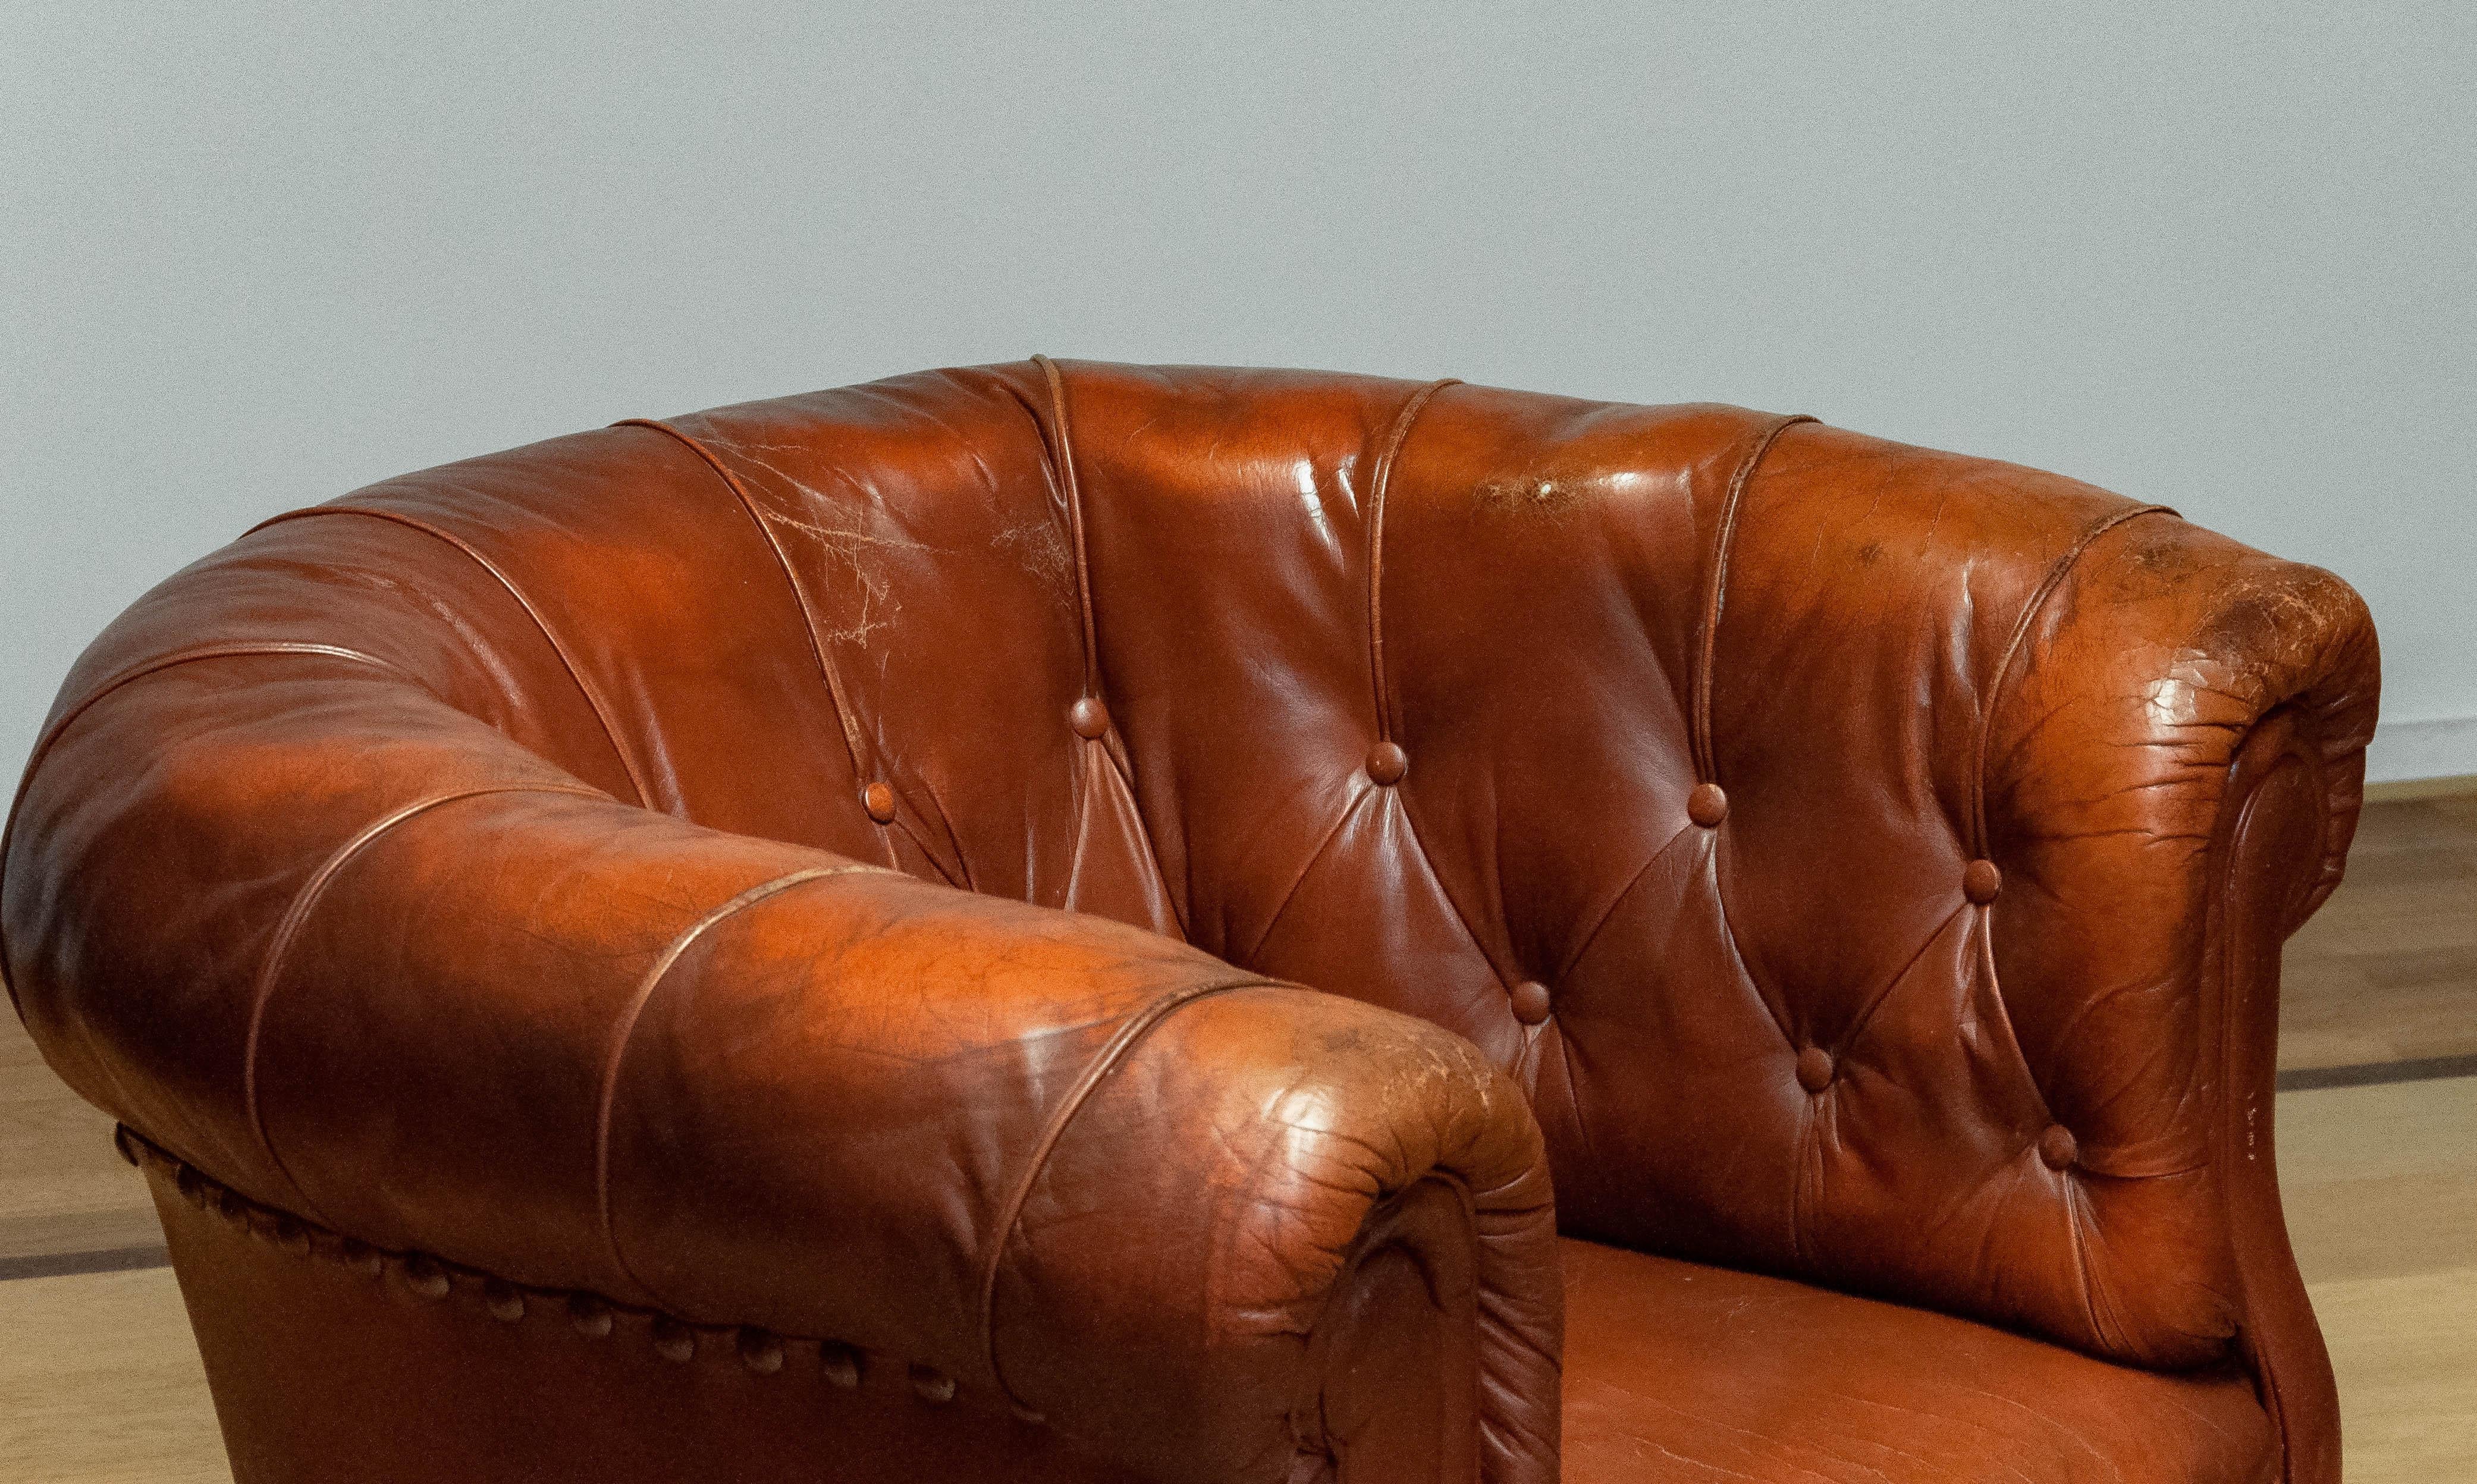 1940s Swedish Tufted Club Chair 'Chesterfield Model' In Tan Brown Worn Leather 8